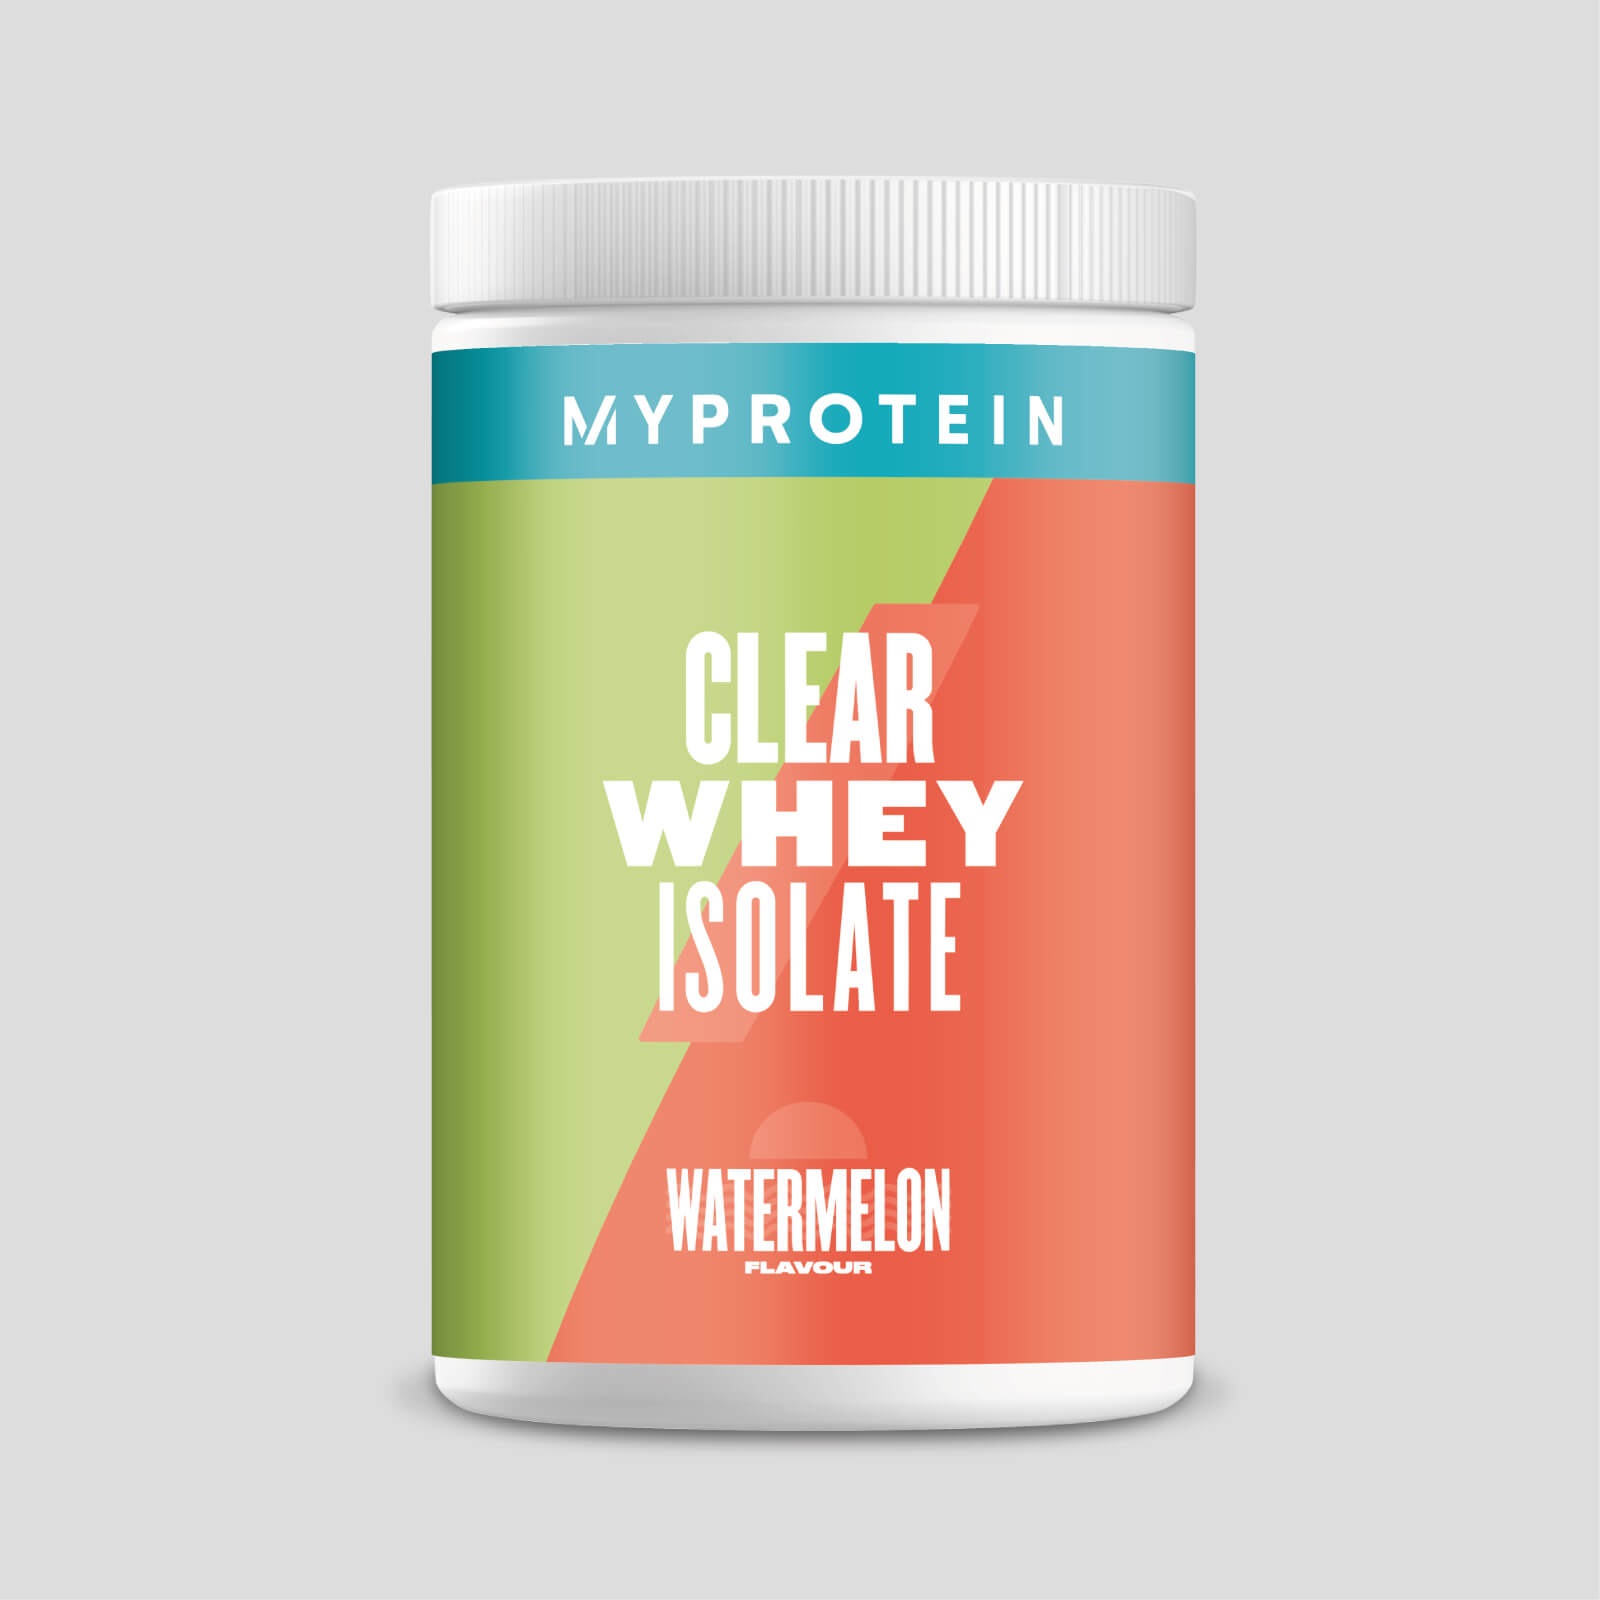 Myprotein Clear Whey Isolate - 20servings - Watermelon